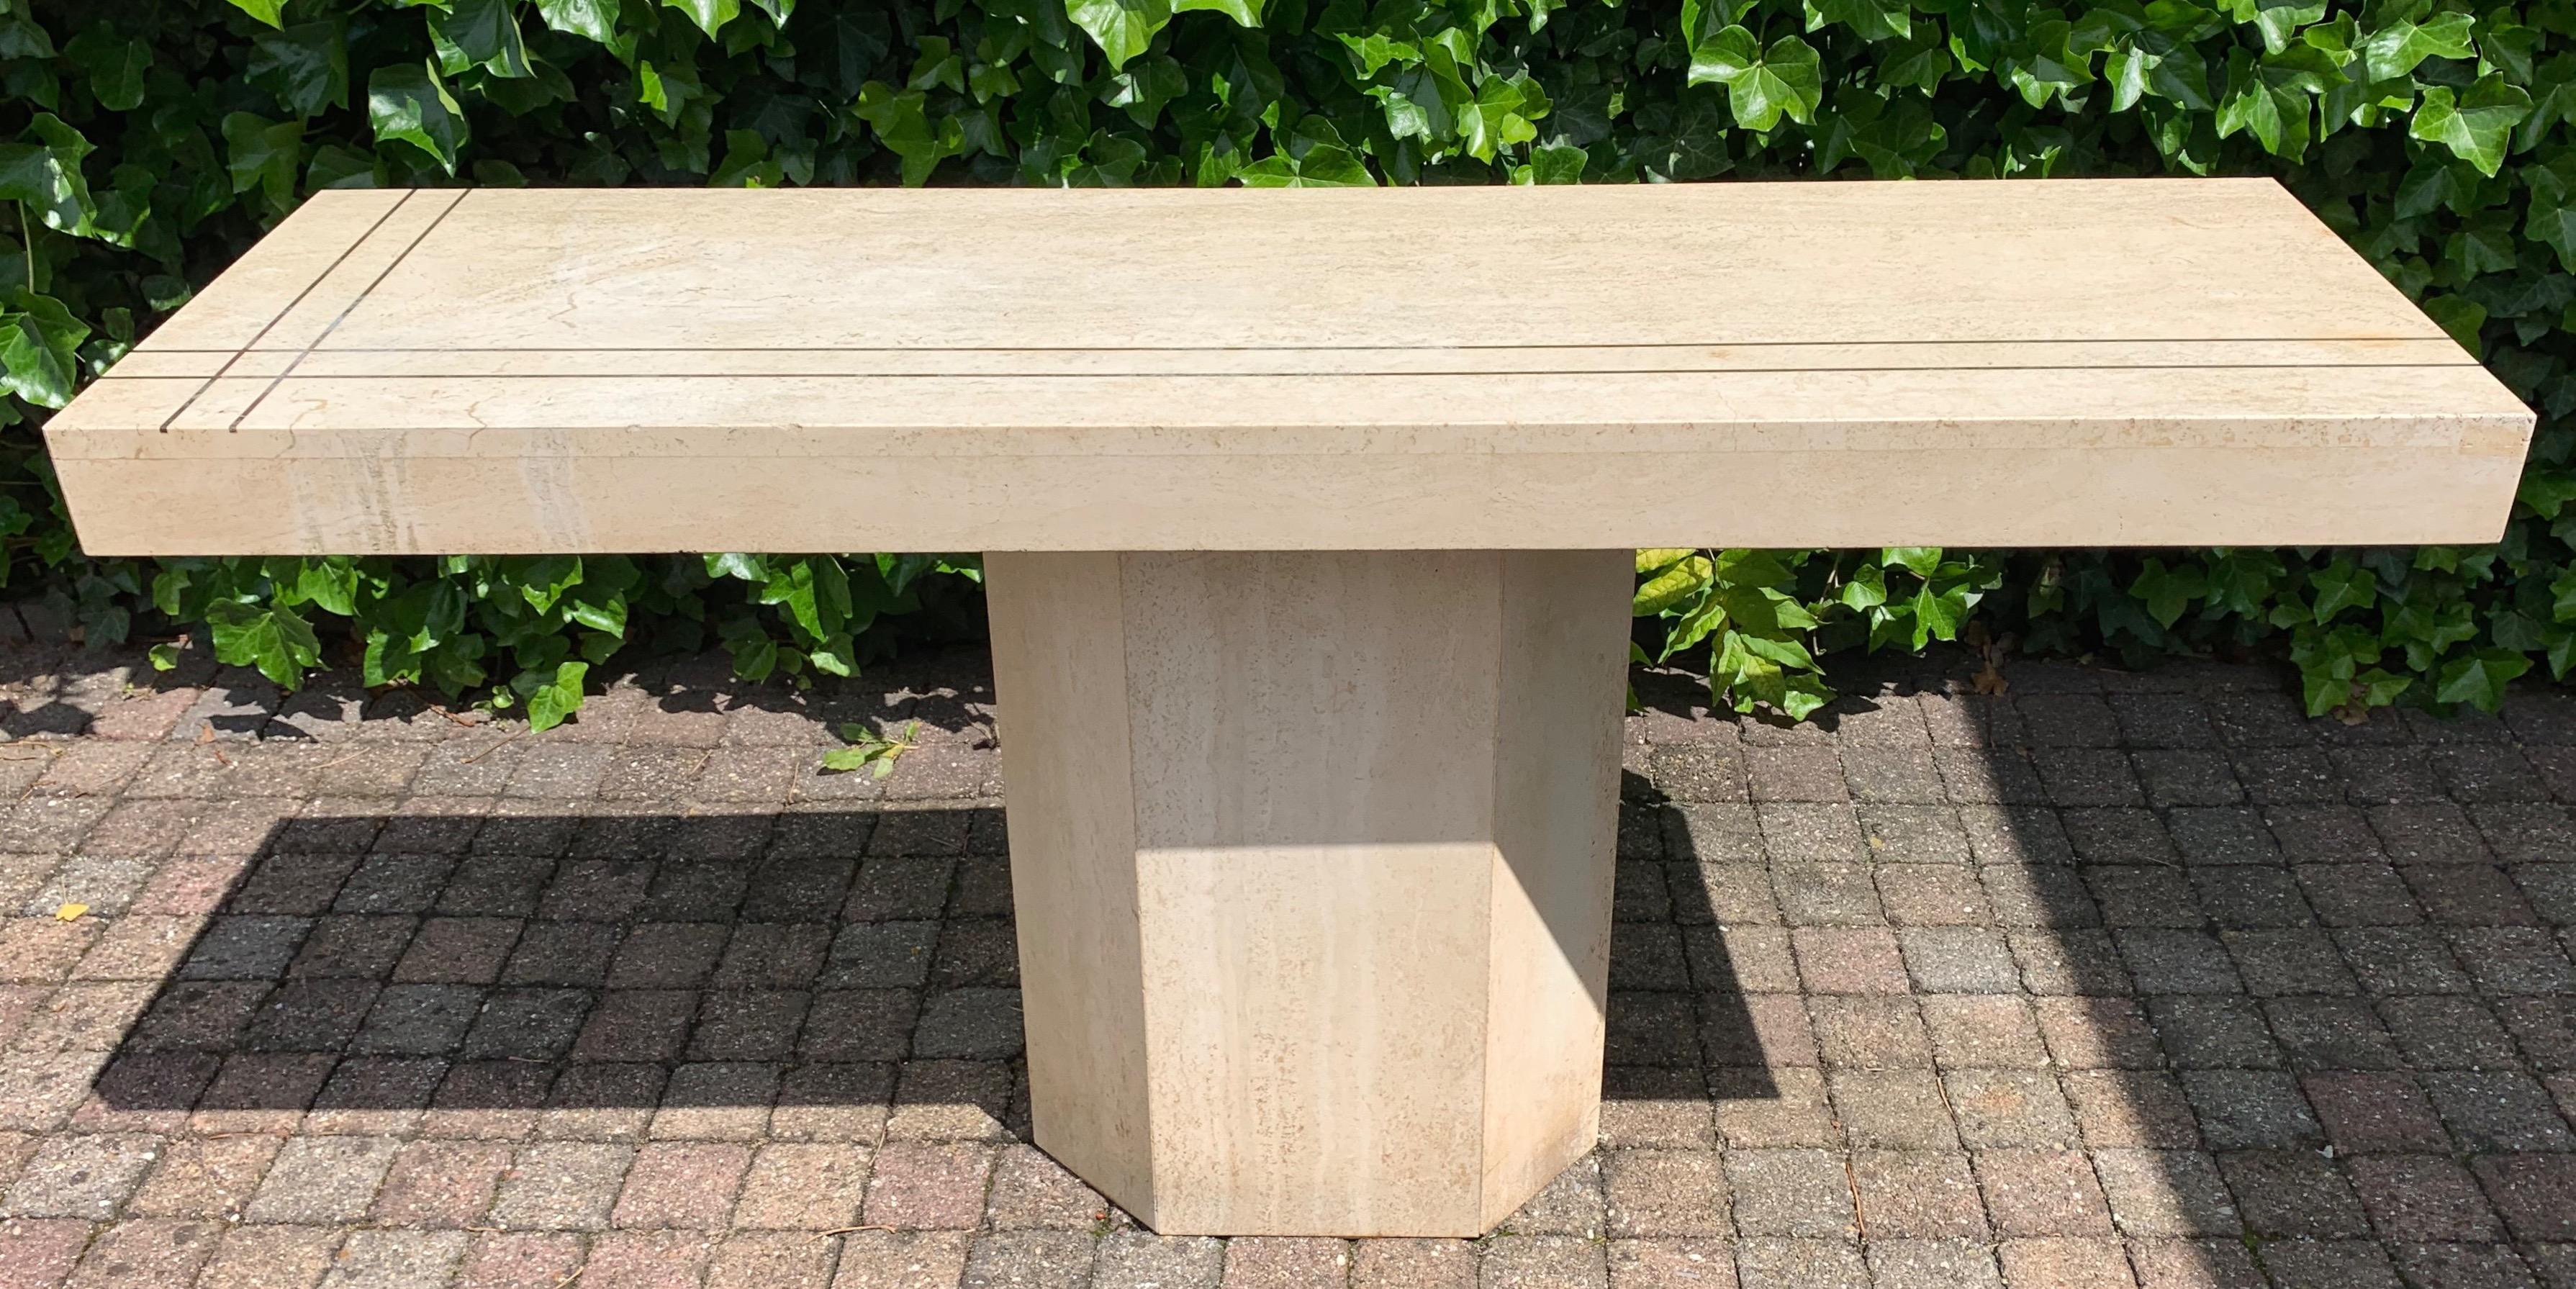 Stylish and functional Italian, hardstone table.

If you are looking for a modernist wall table for your home or office then this rare and impressive design from the Mid-Century Modern era could be perfect for you. We were immediately sold when we